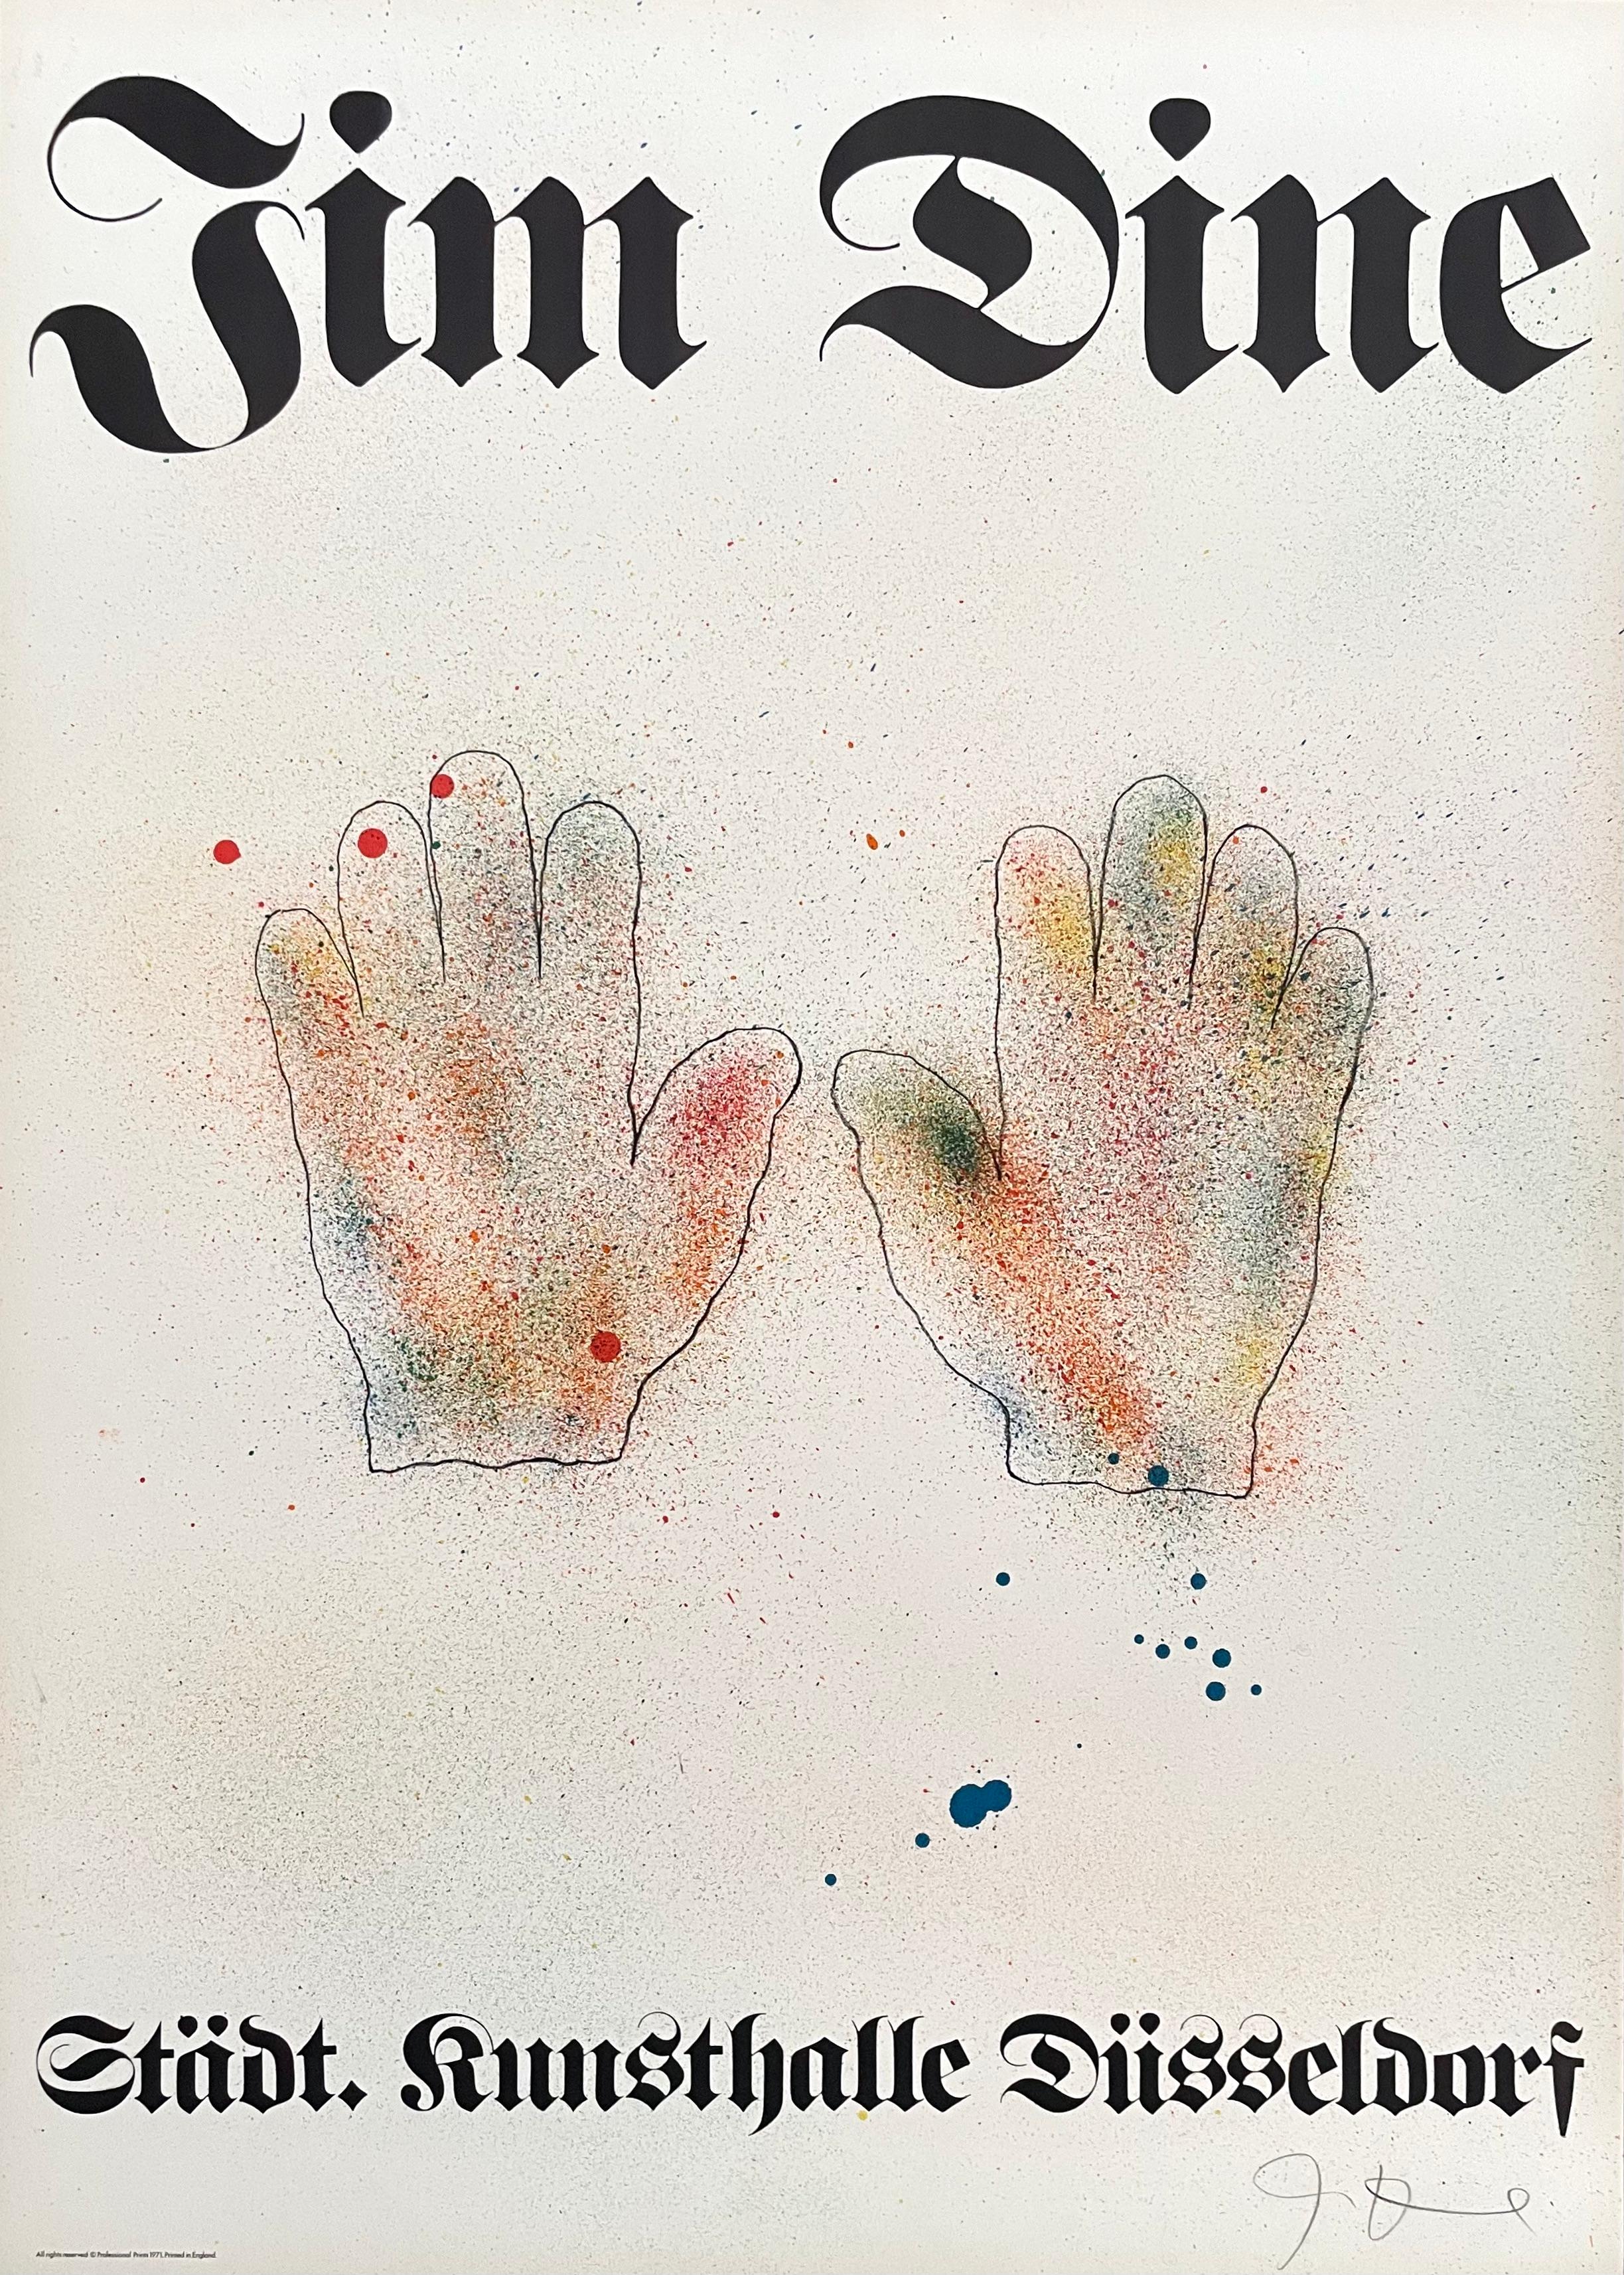 Artist: After Jim Dine (1935)
Title: Hands, exhibition poster
Year: 1971
Medium: Lithograph on Arches paper
Size: 30.75 x 22 inches
Condition: Excellent
Inscription: Signed by the artist in pencil.
Notes: Published by Professional Prints

JIM DINE